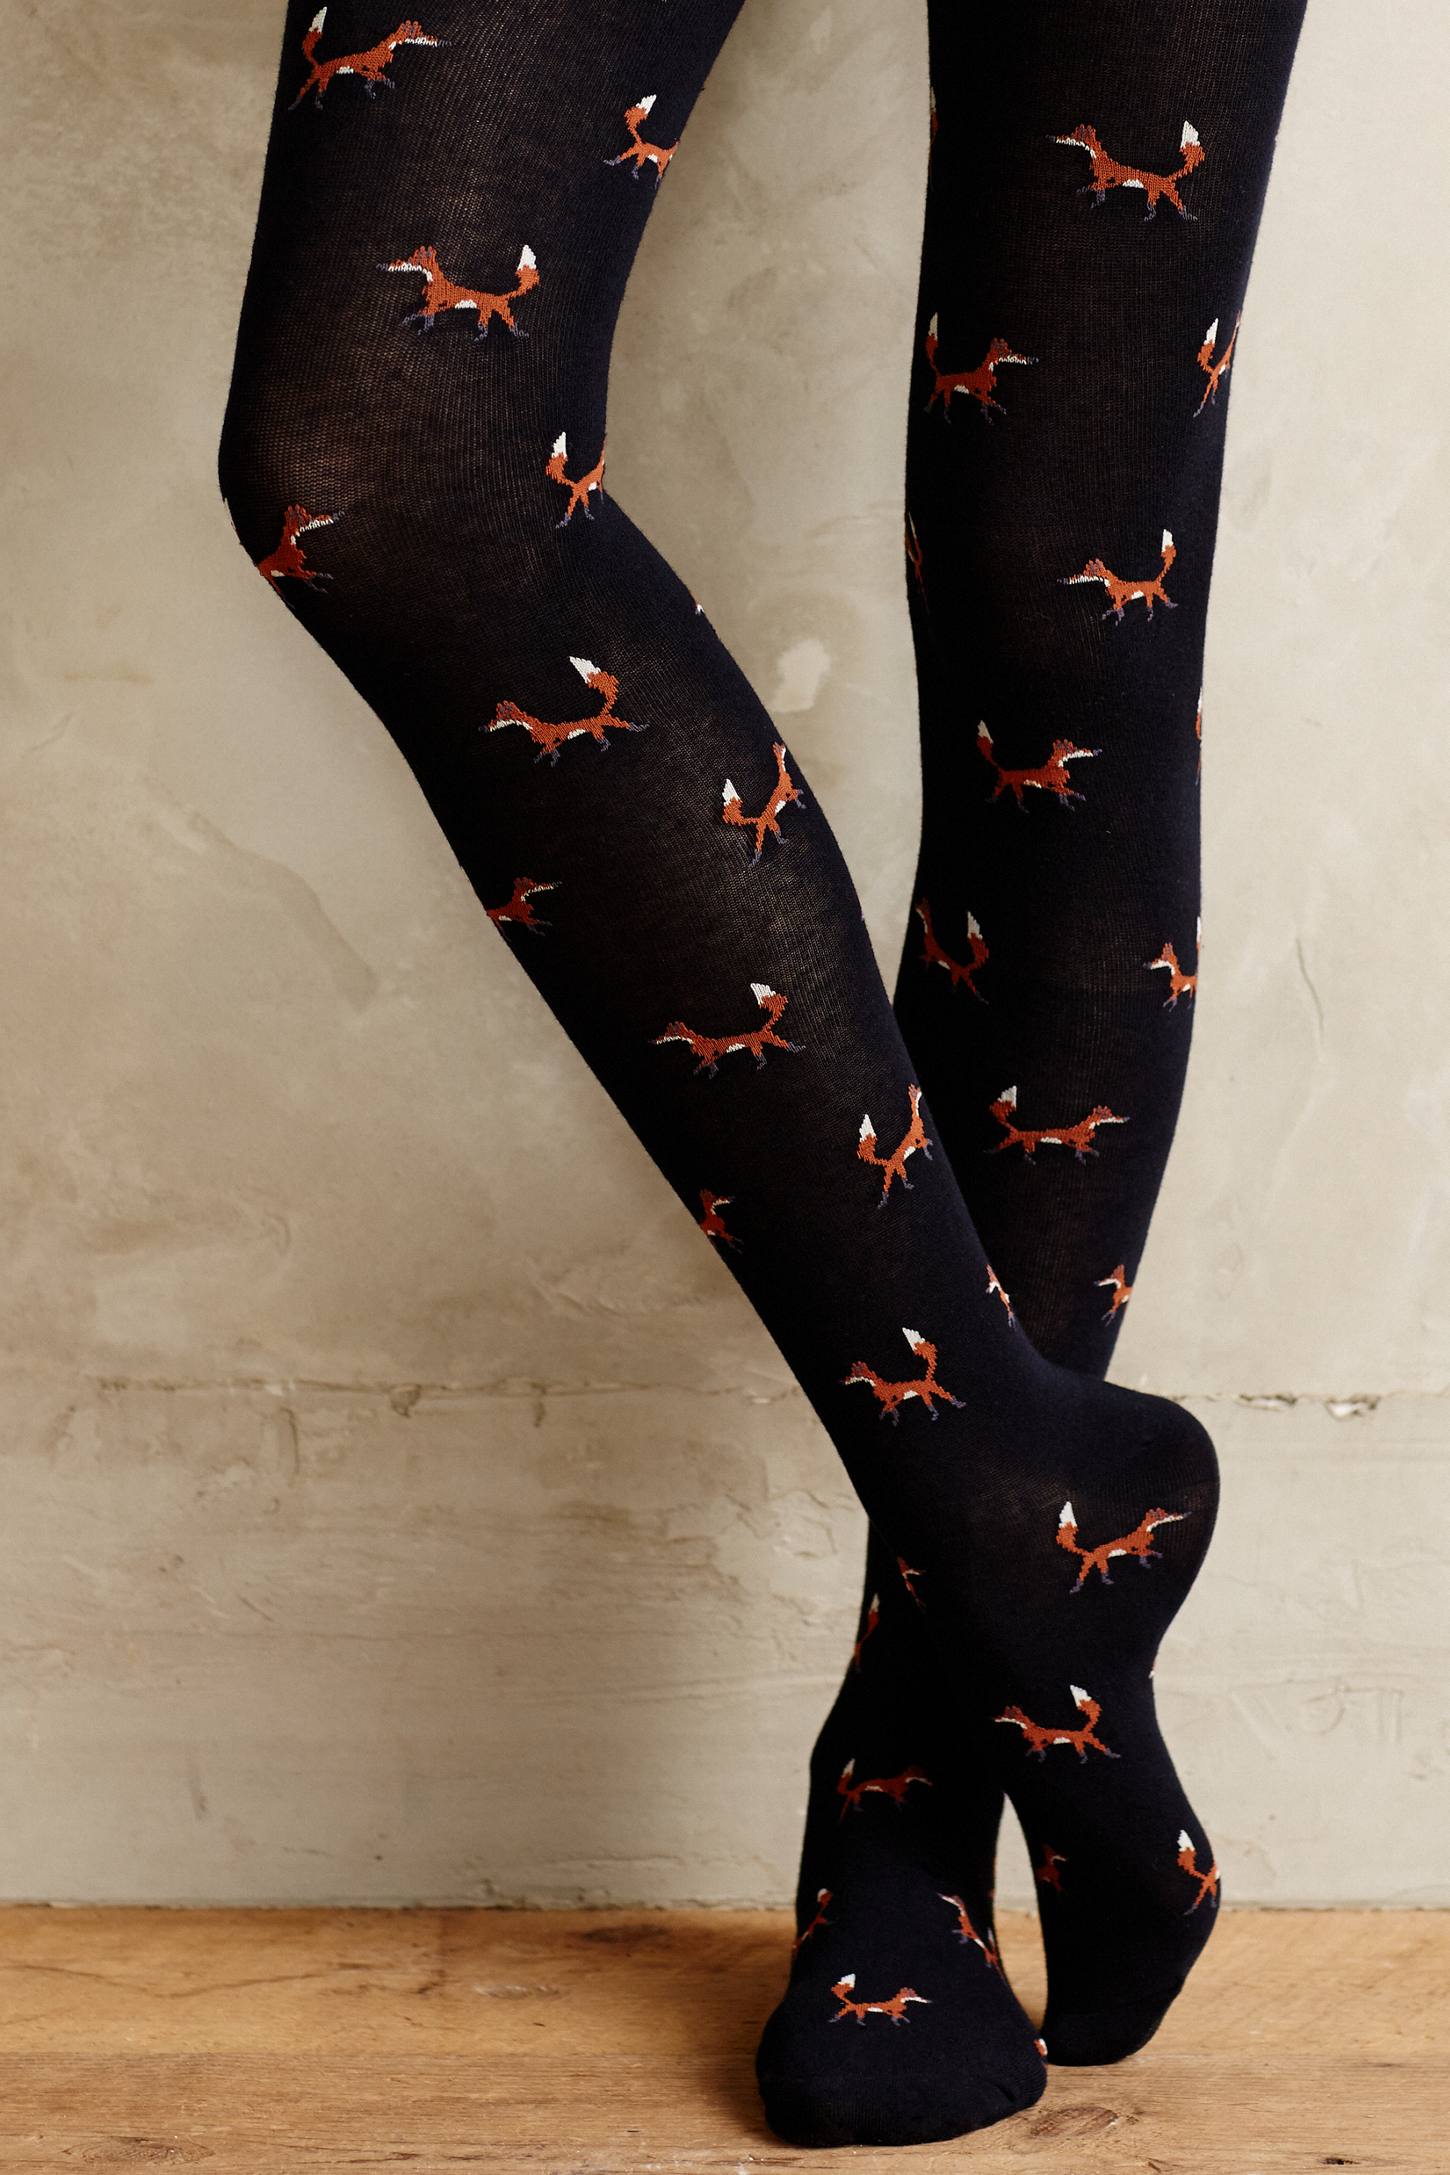 Fox Trot Tights by Hansel from Basel, $29.50